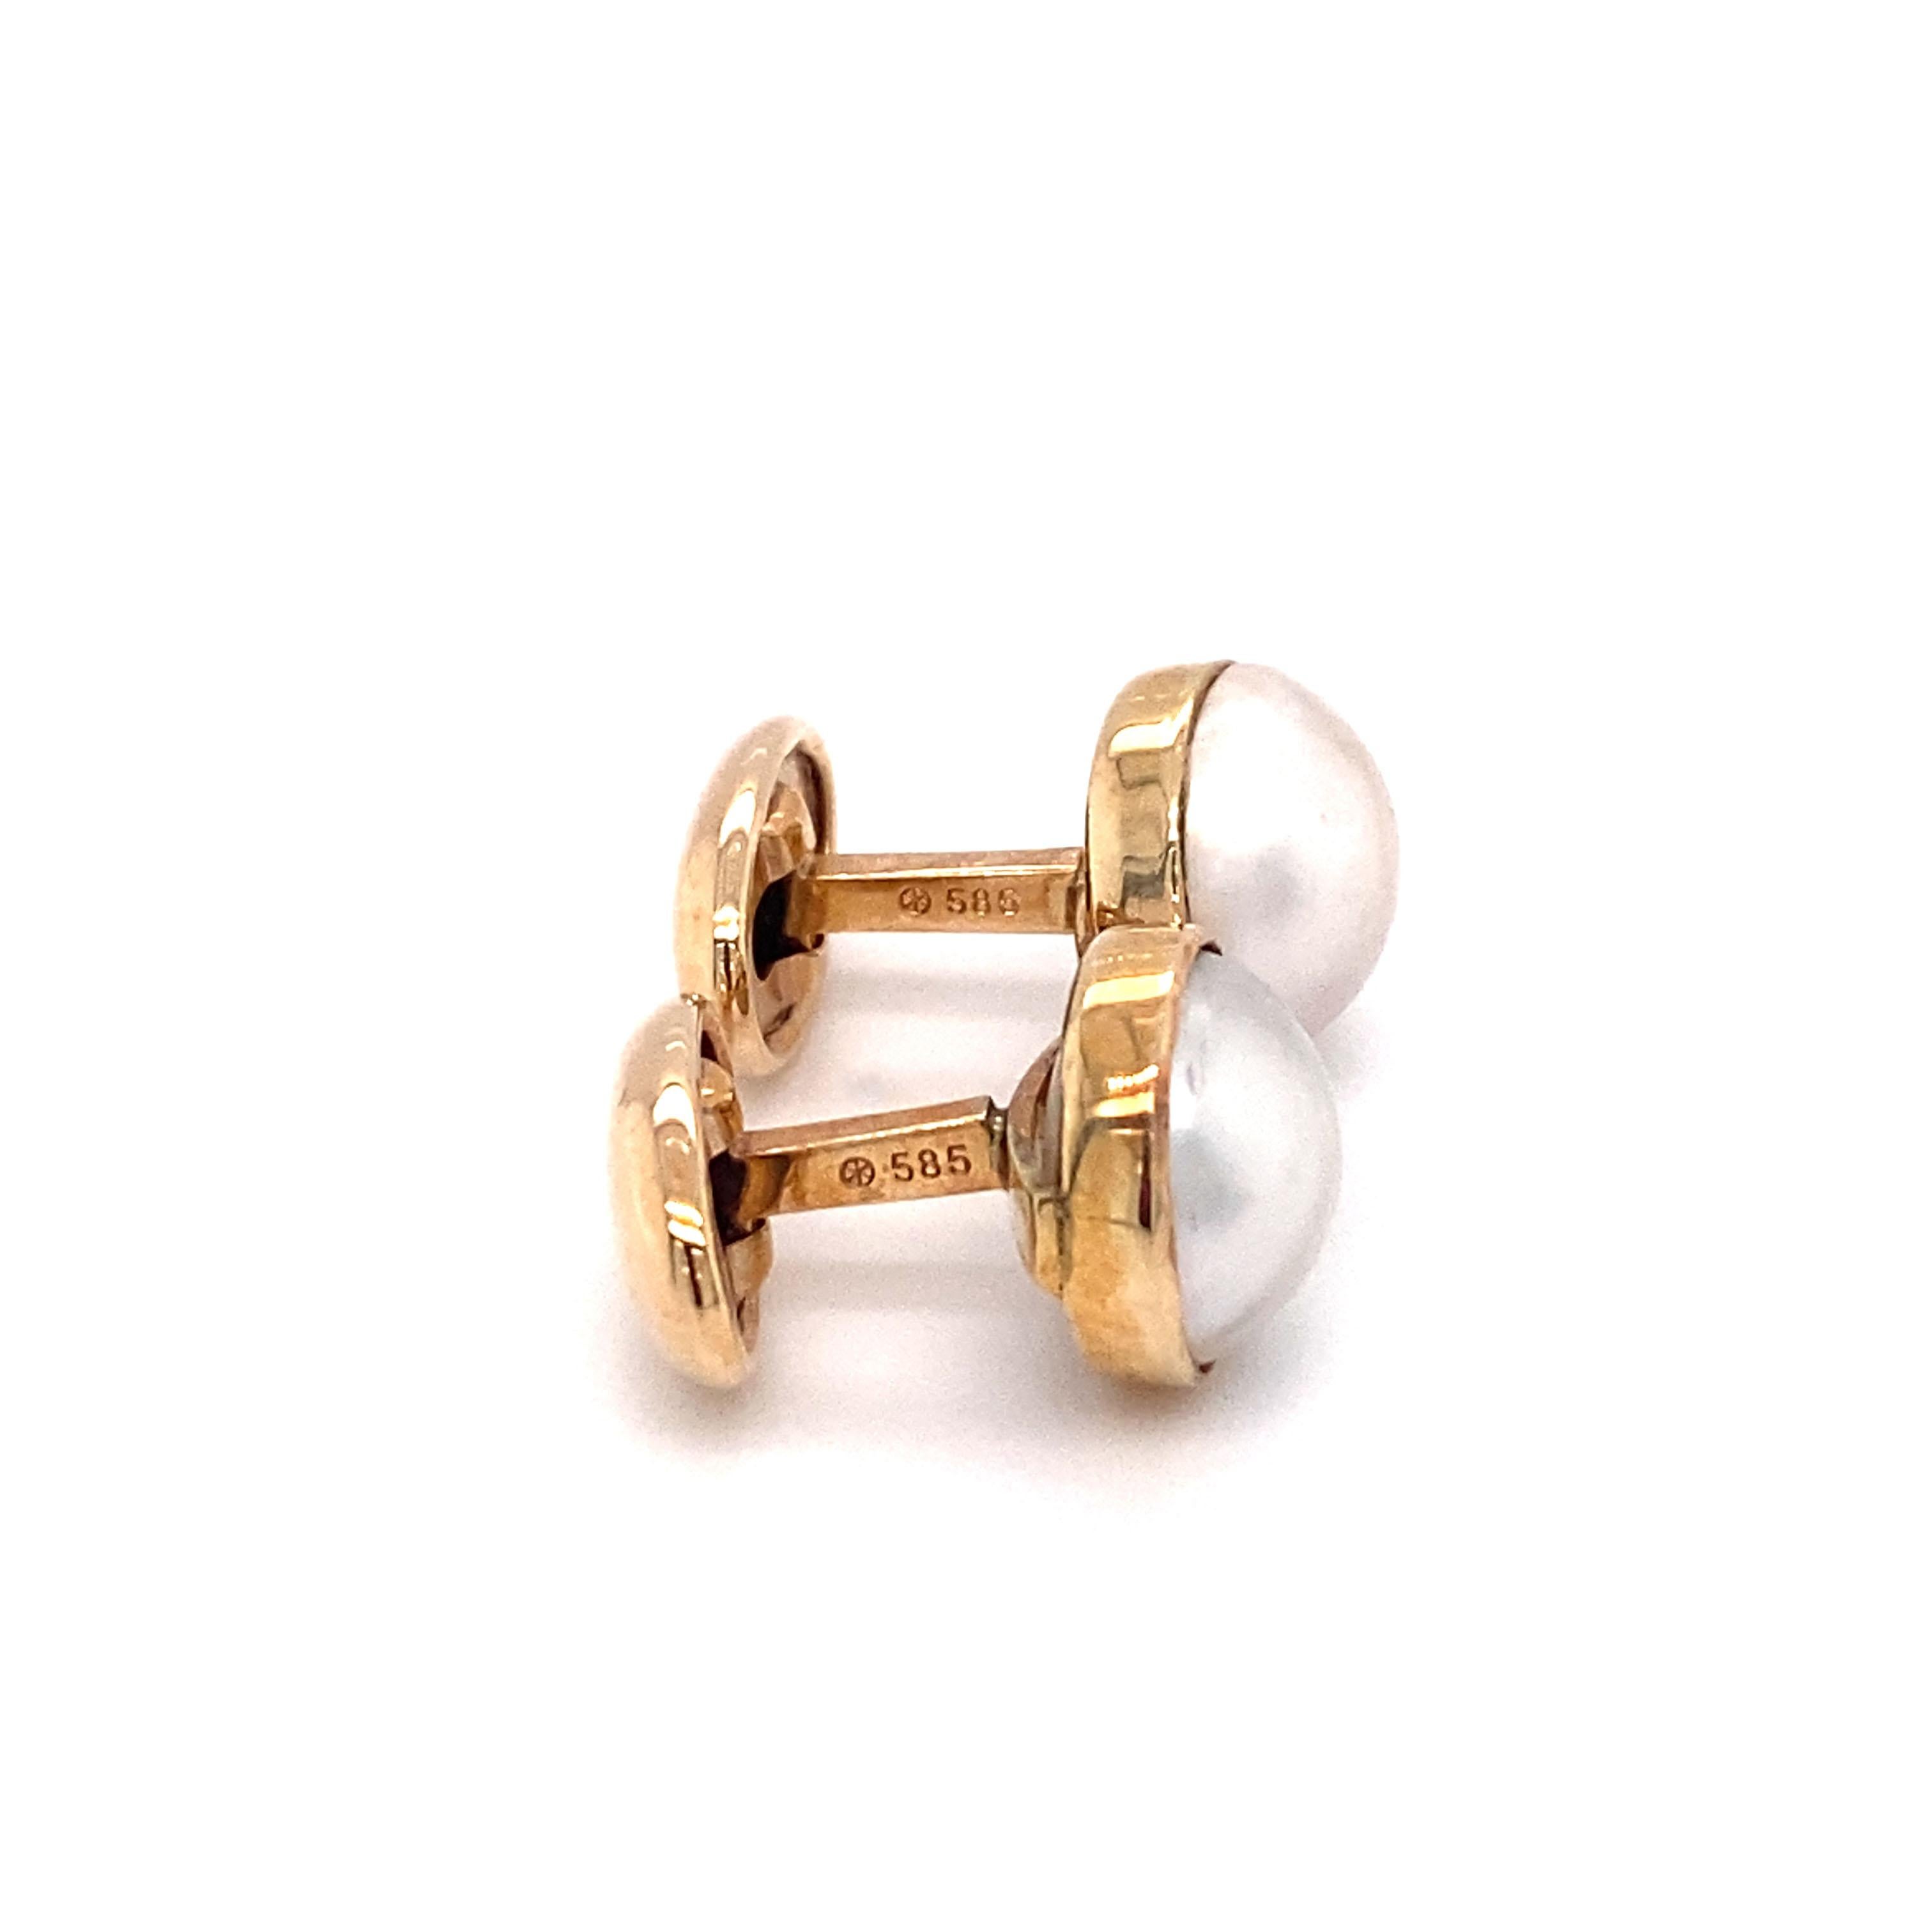 Circa: 1980s
Metal Type: 14K Gold
Size: 0.5in L
Weight: 4.3g